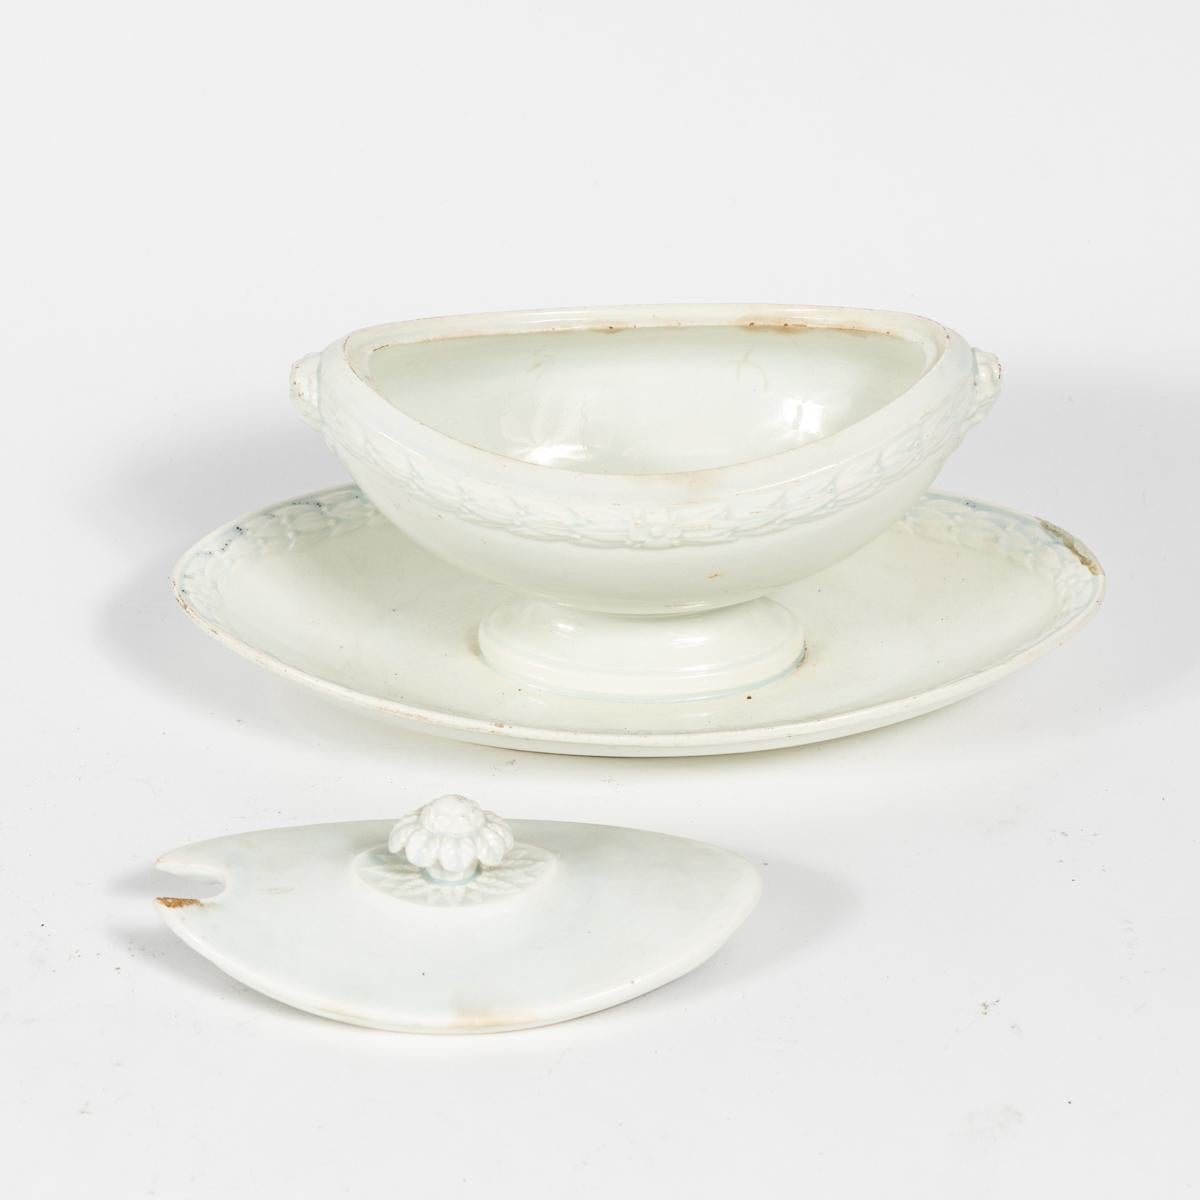 Creamware or faïence fine sauce-boat with saucer from late 19th-century France. Faïence is a type of ceramic pottery that allows for colorized decoration due to its tin glaze; faïence fine refers to what was known in England as creamware. Suitable